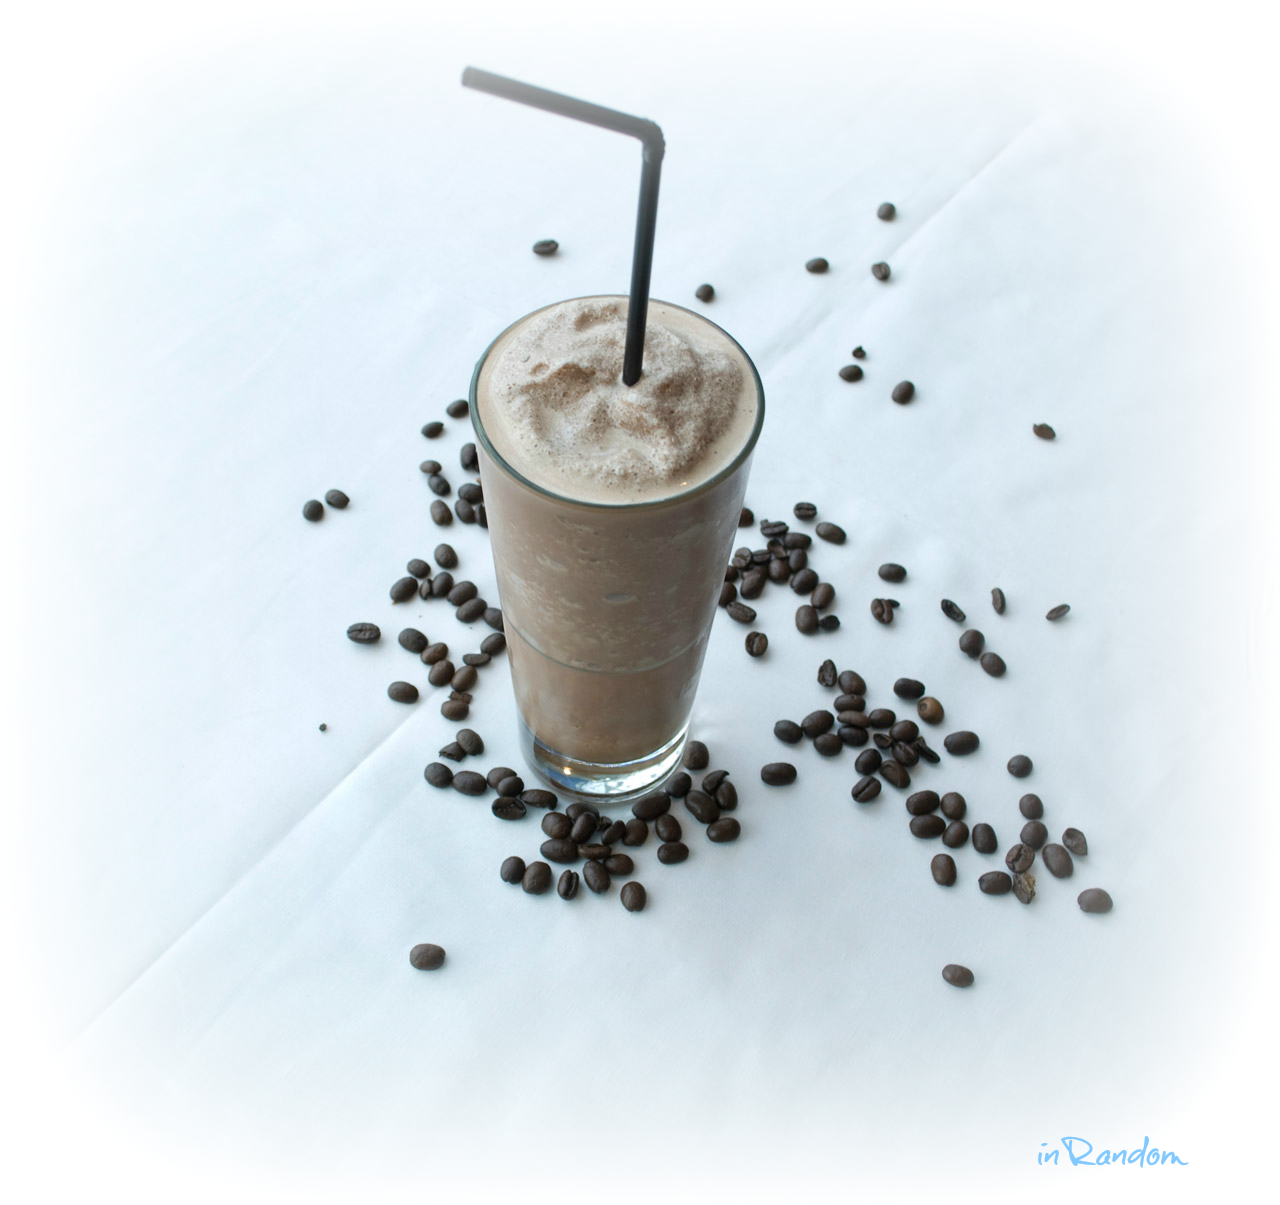 DIY Frozen Coffee Drinks at Home!